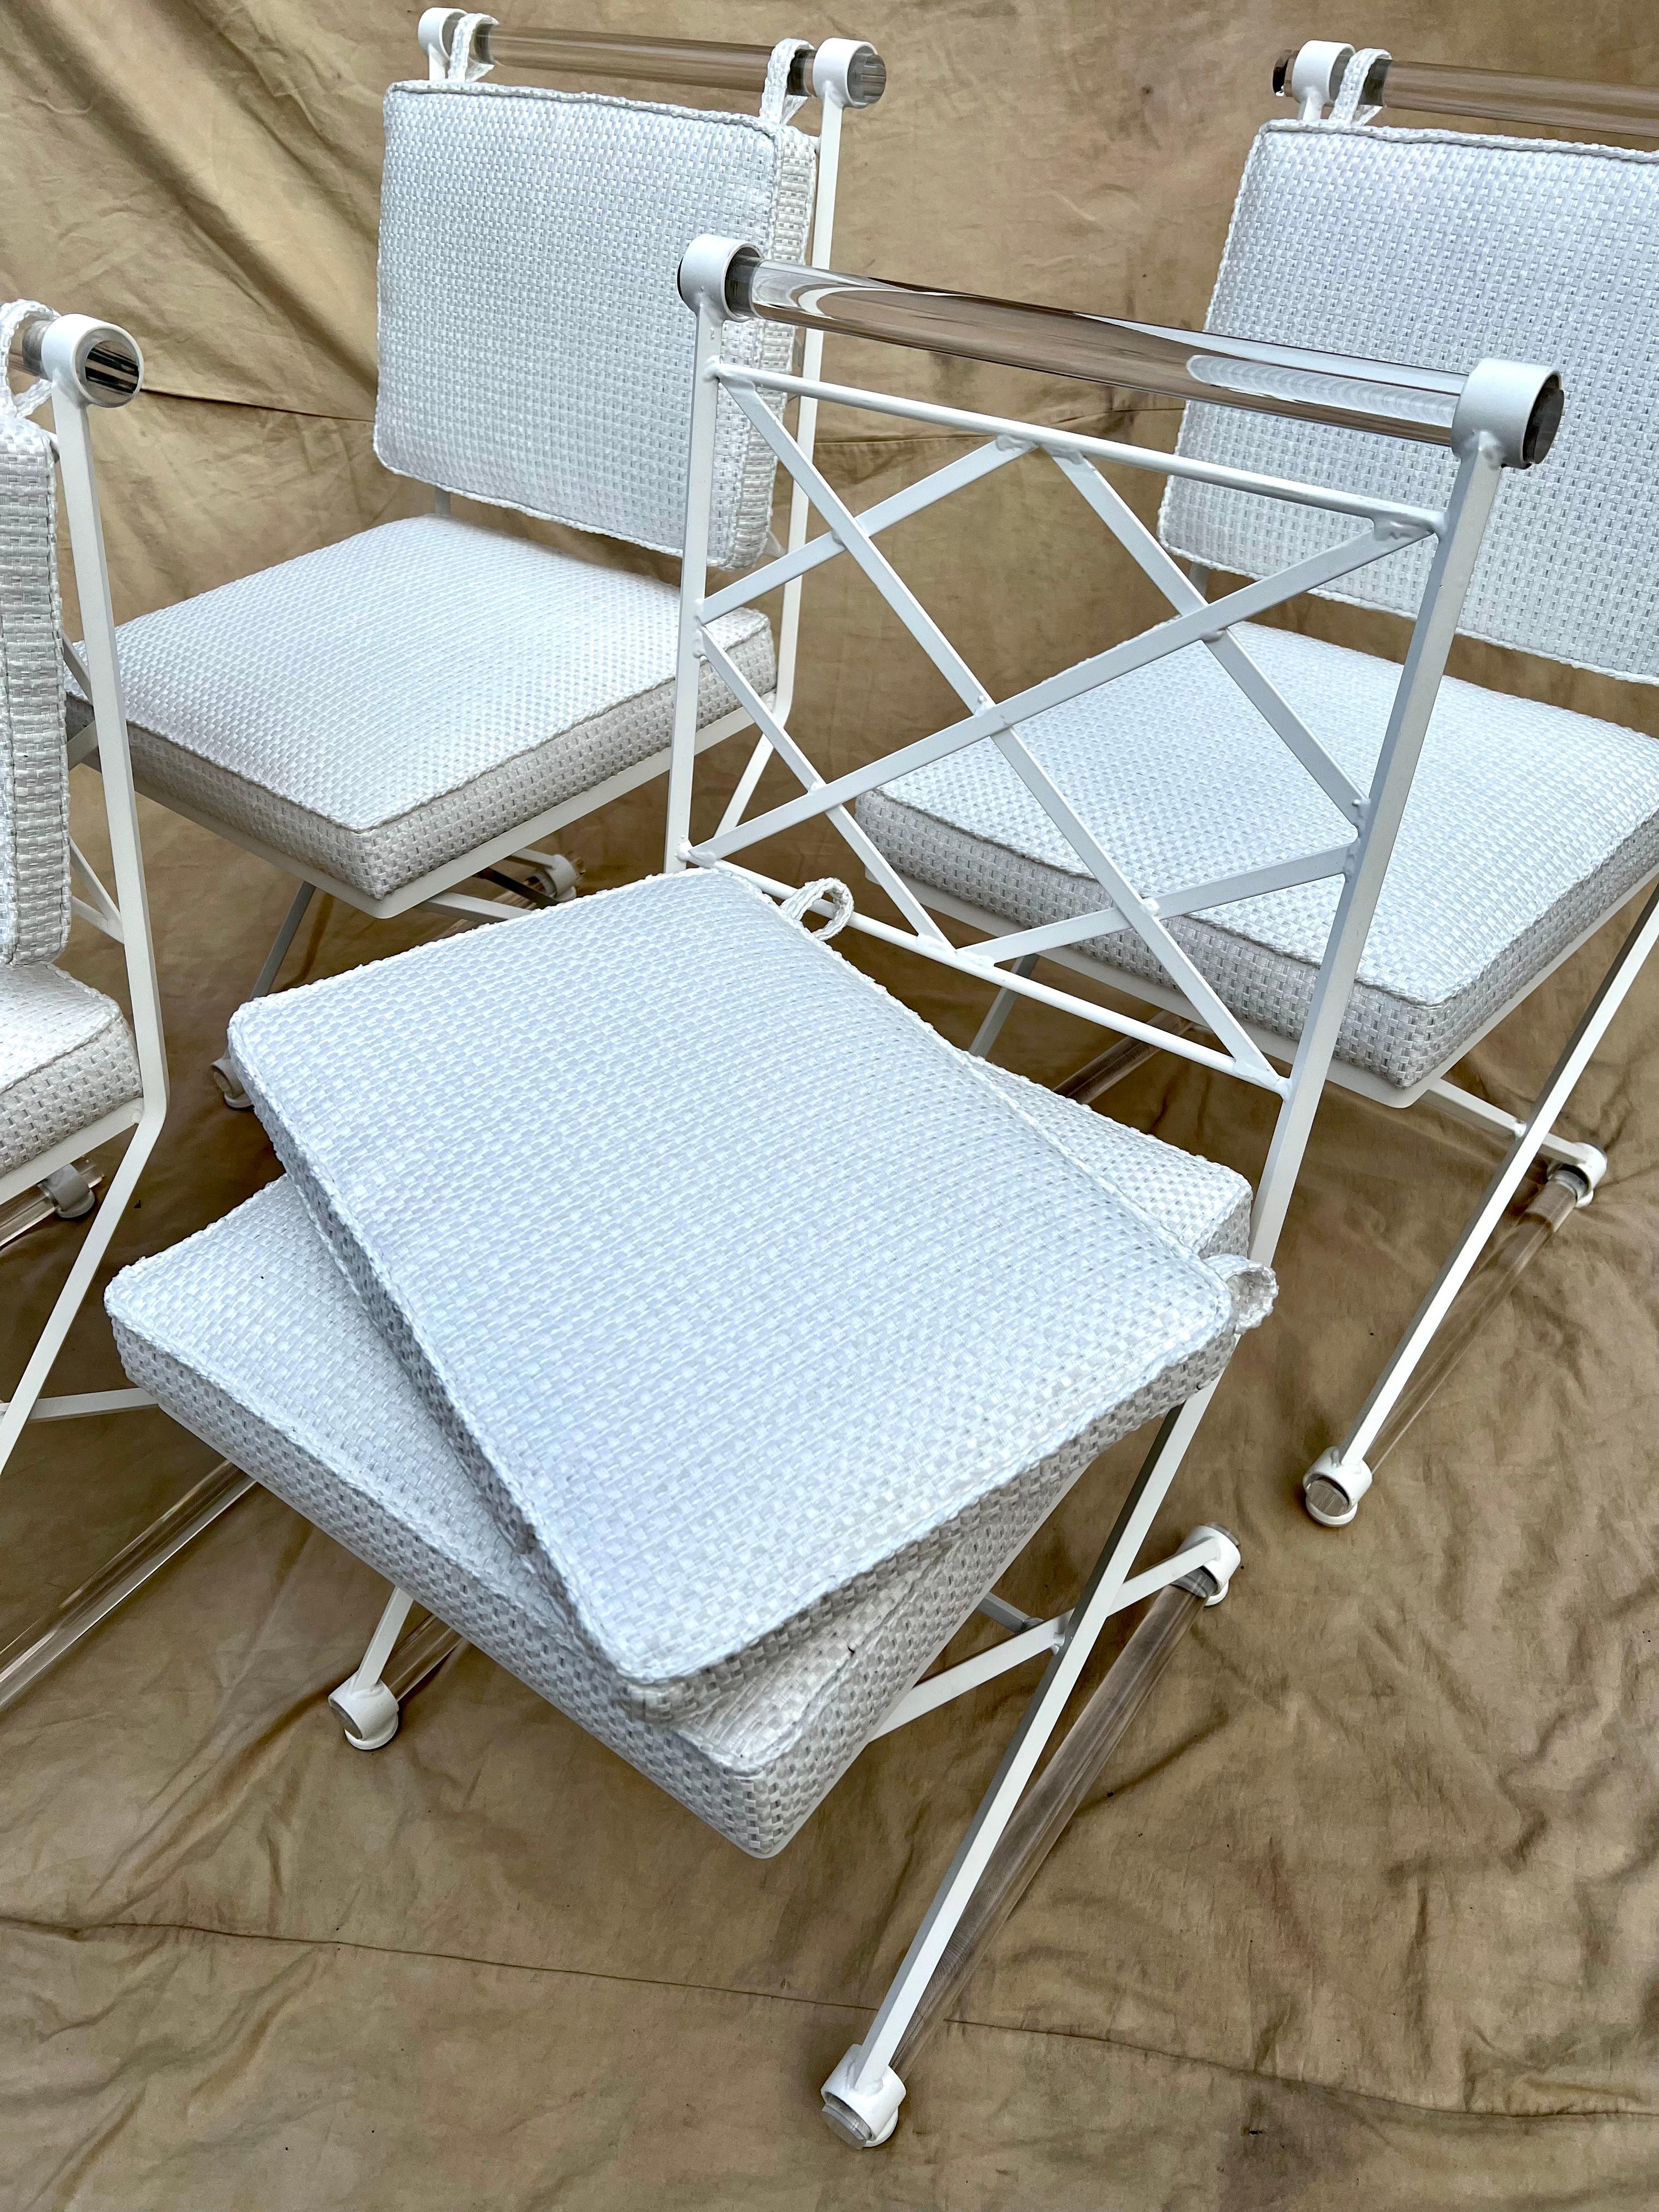 Cleo Baldon X-Form Chairs Restored with Acrylic Dowels and Sunbrella Upholstery For Sale 1